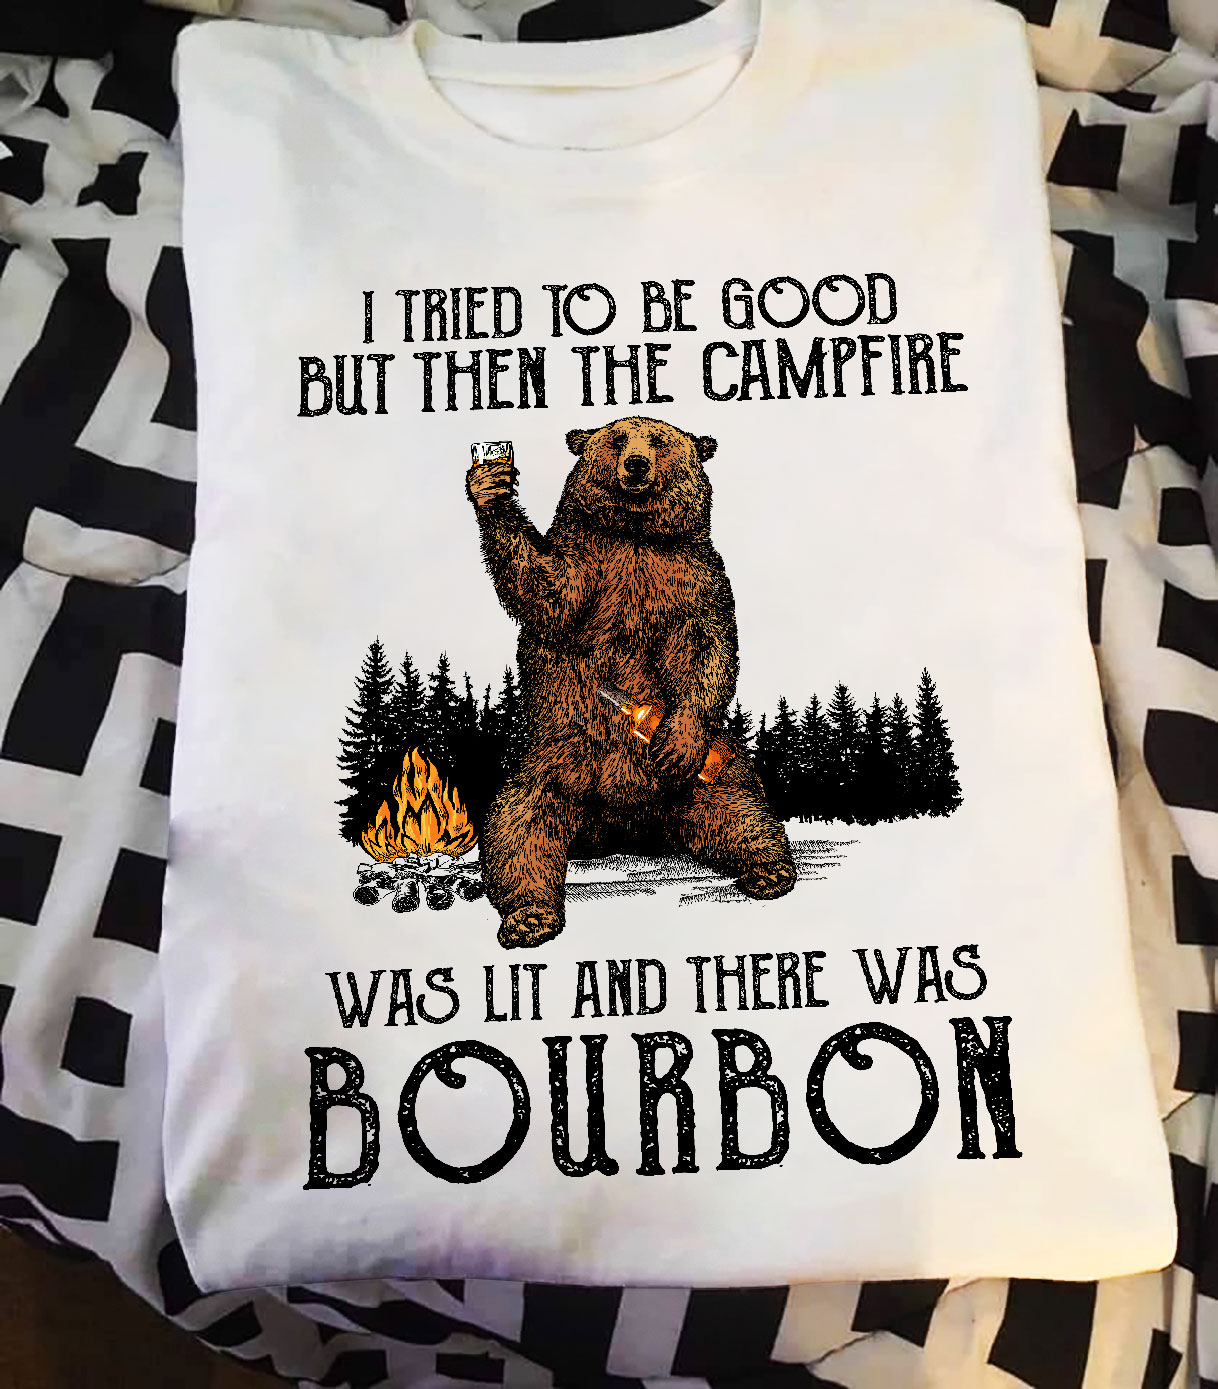 I tried to be good but then the camfire was lit and there was Bourbon